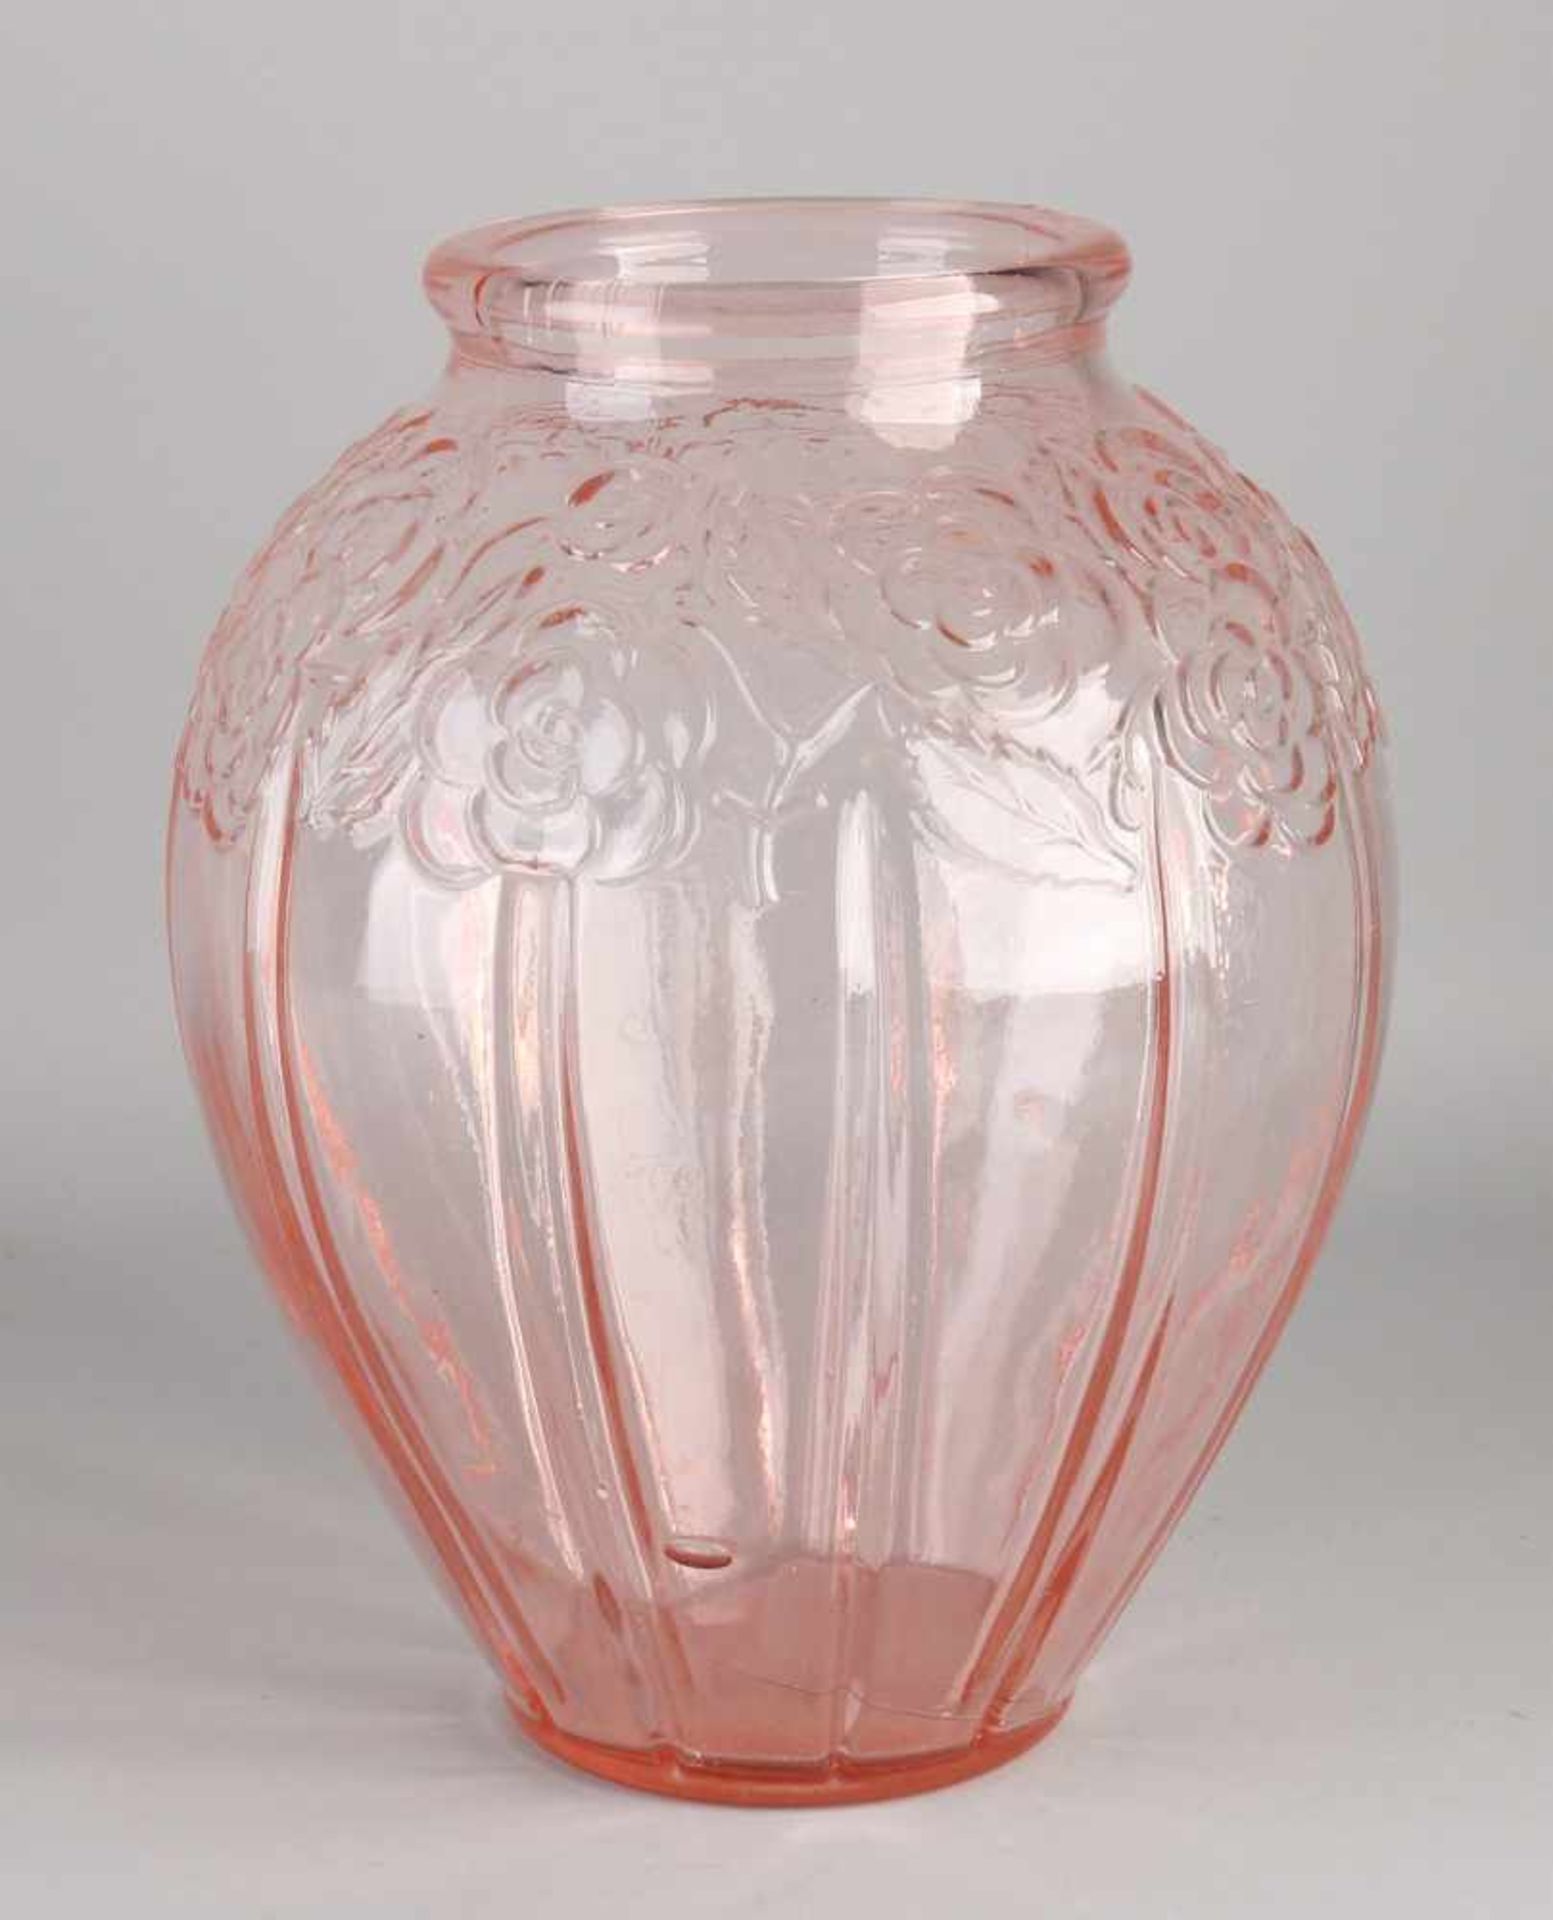 Large red-pink French pressed glass Art Nouveau vase with floral decoration. Circa 1920. Size: 31